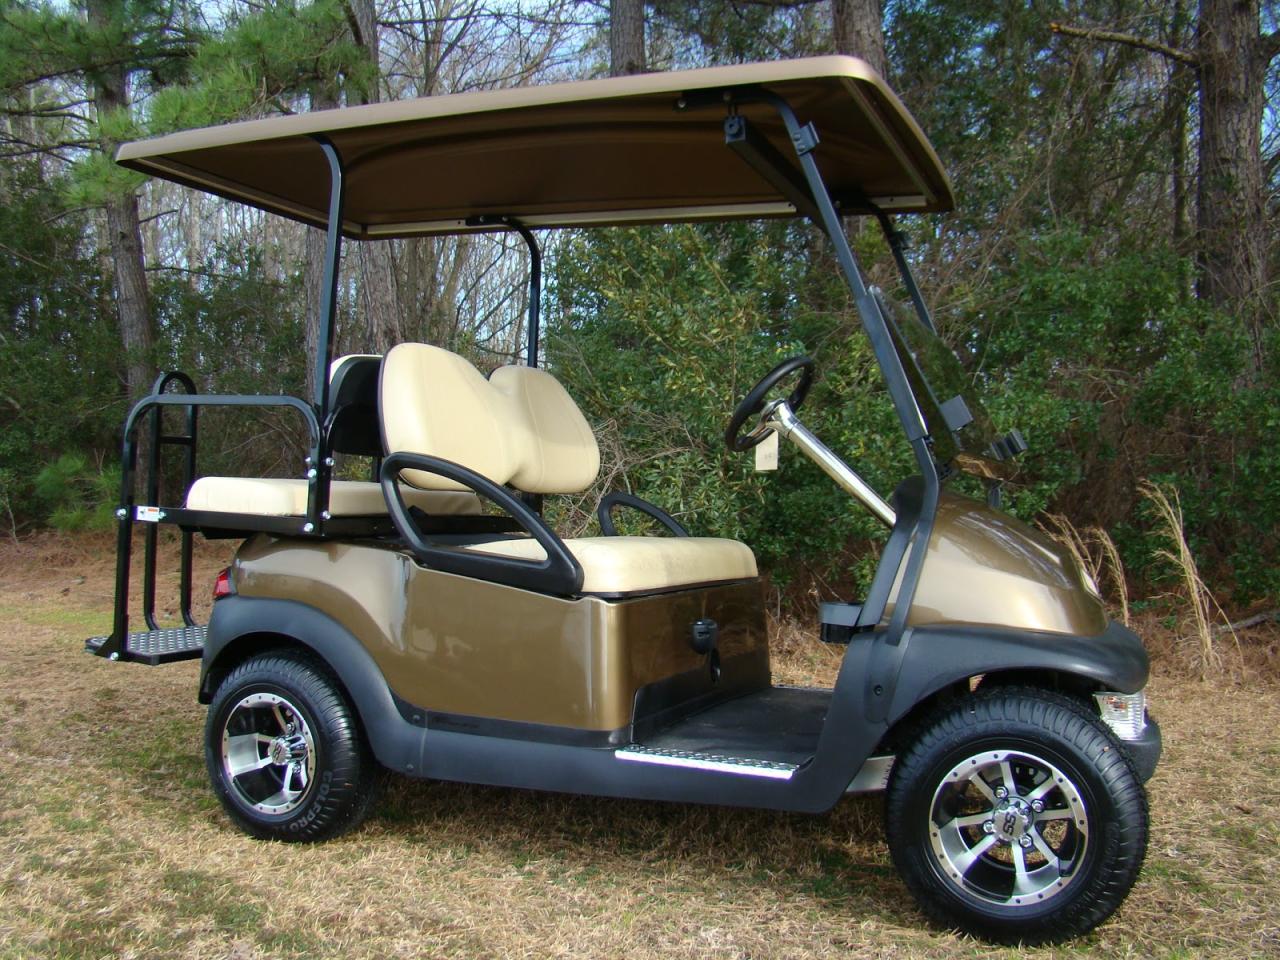 Used Golf Carts for Sale by Owner in San Lorenzo, Puerto Rico: Your Guide to Finding the Perfect Cart